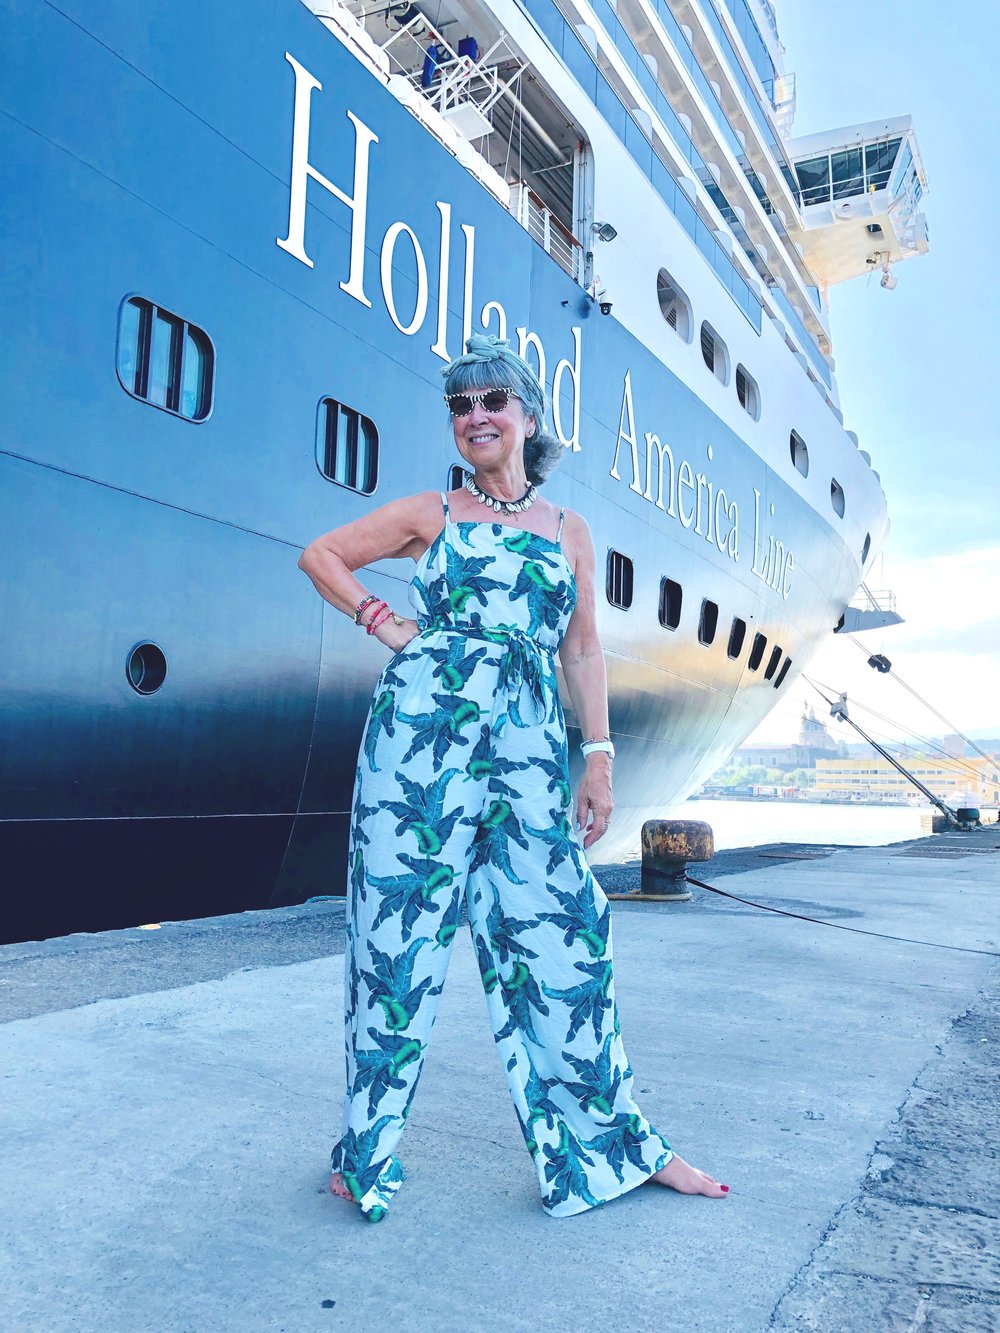 Holland America's Music Walk Changes The Game For Cruise Ship Night Life -  Cruise Addicts